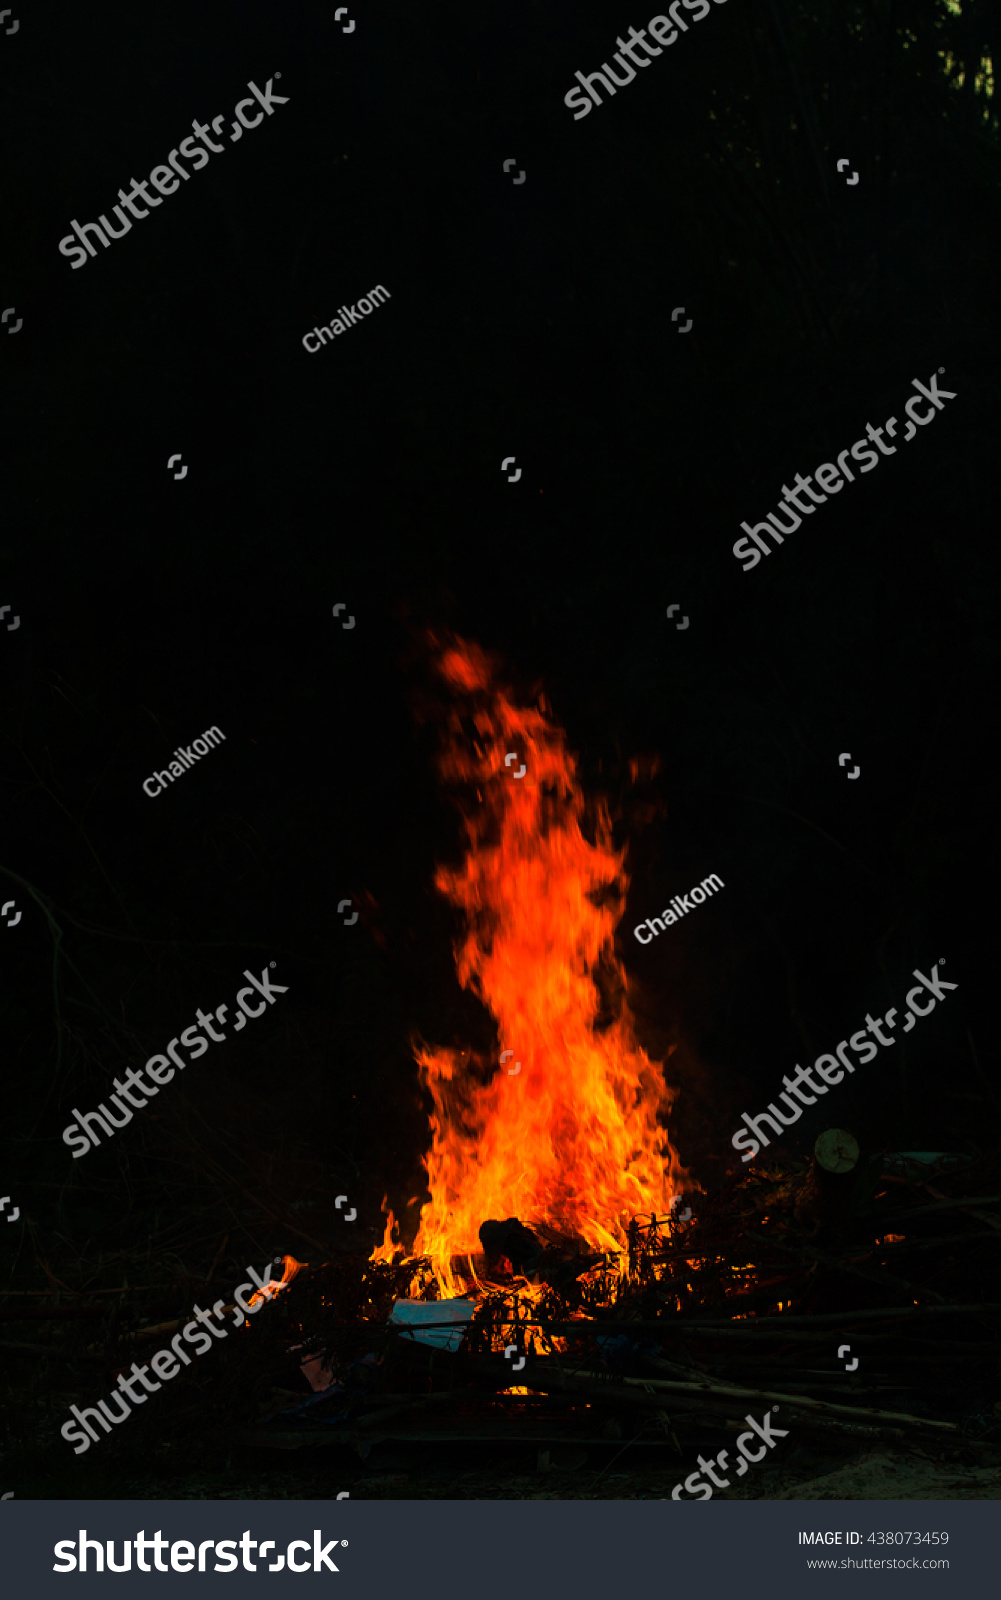 Flames in a bonfire on black background #438073459